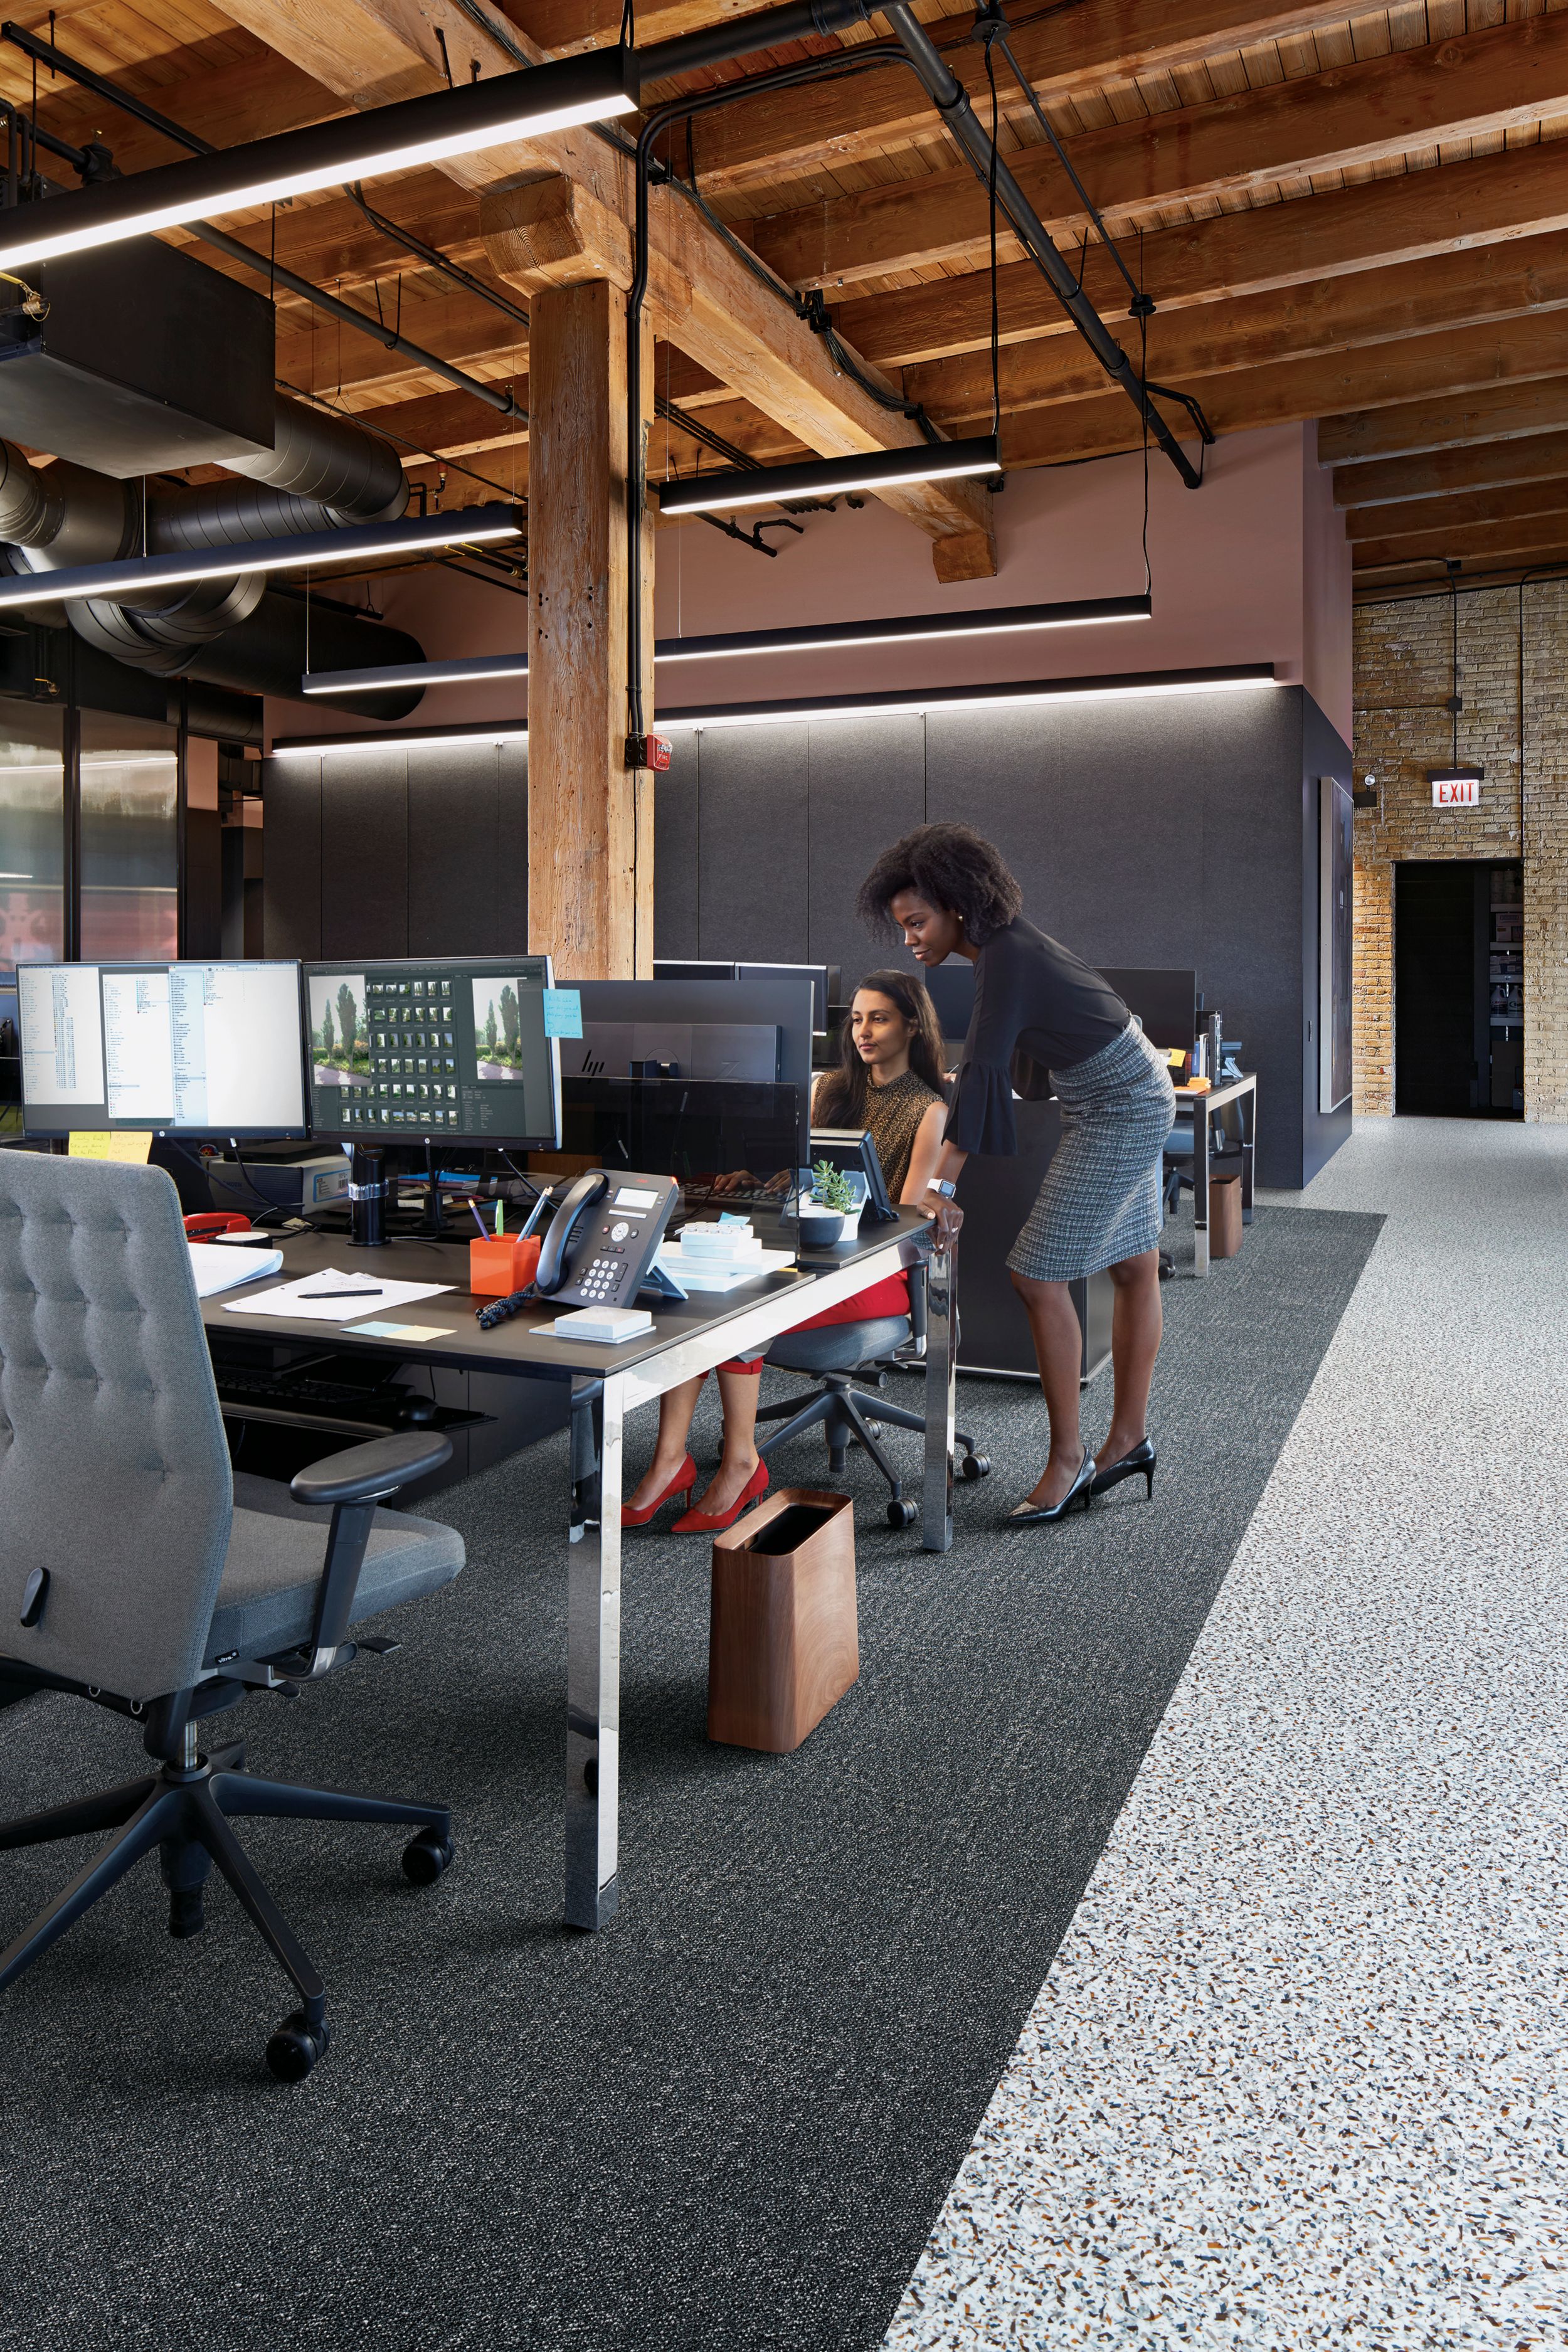 Interface Step it Up and Walk on By carpet tile in common work space with two people image number 8